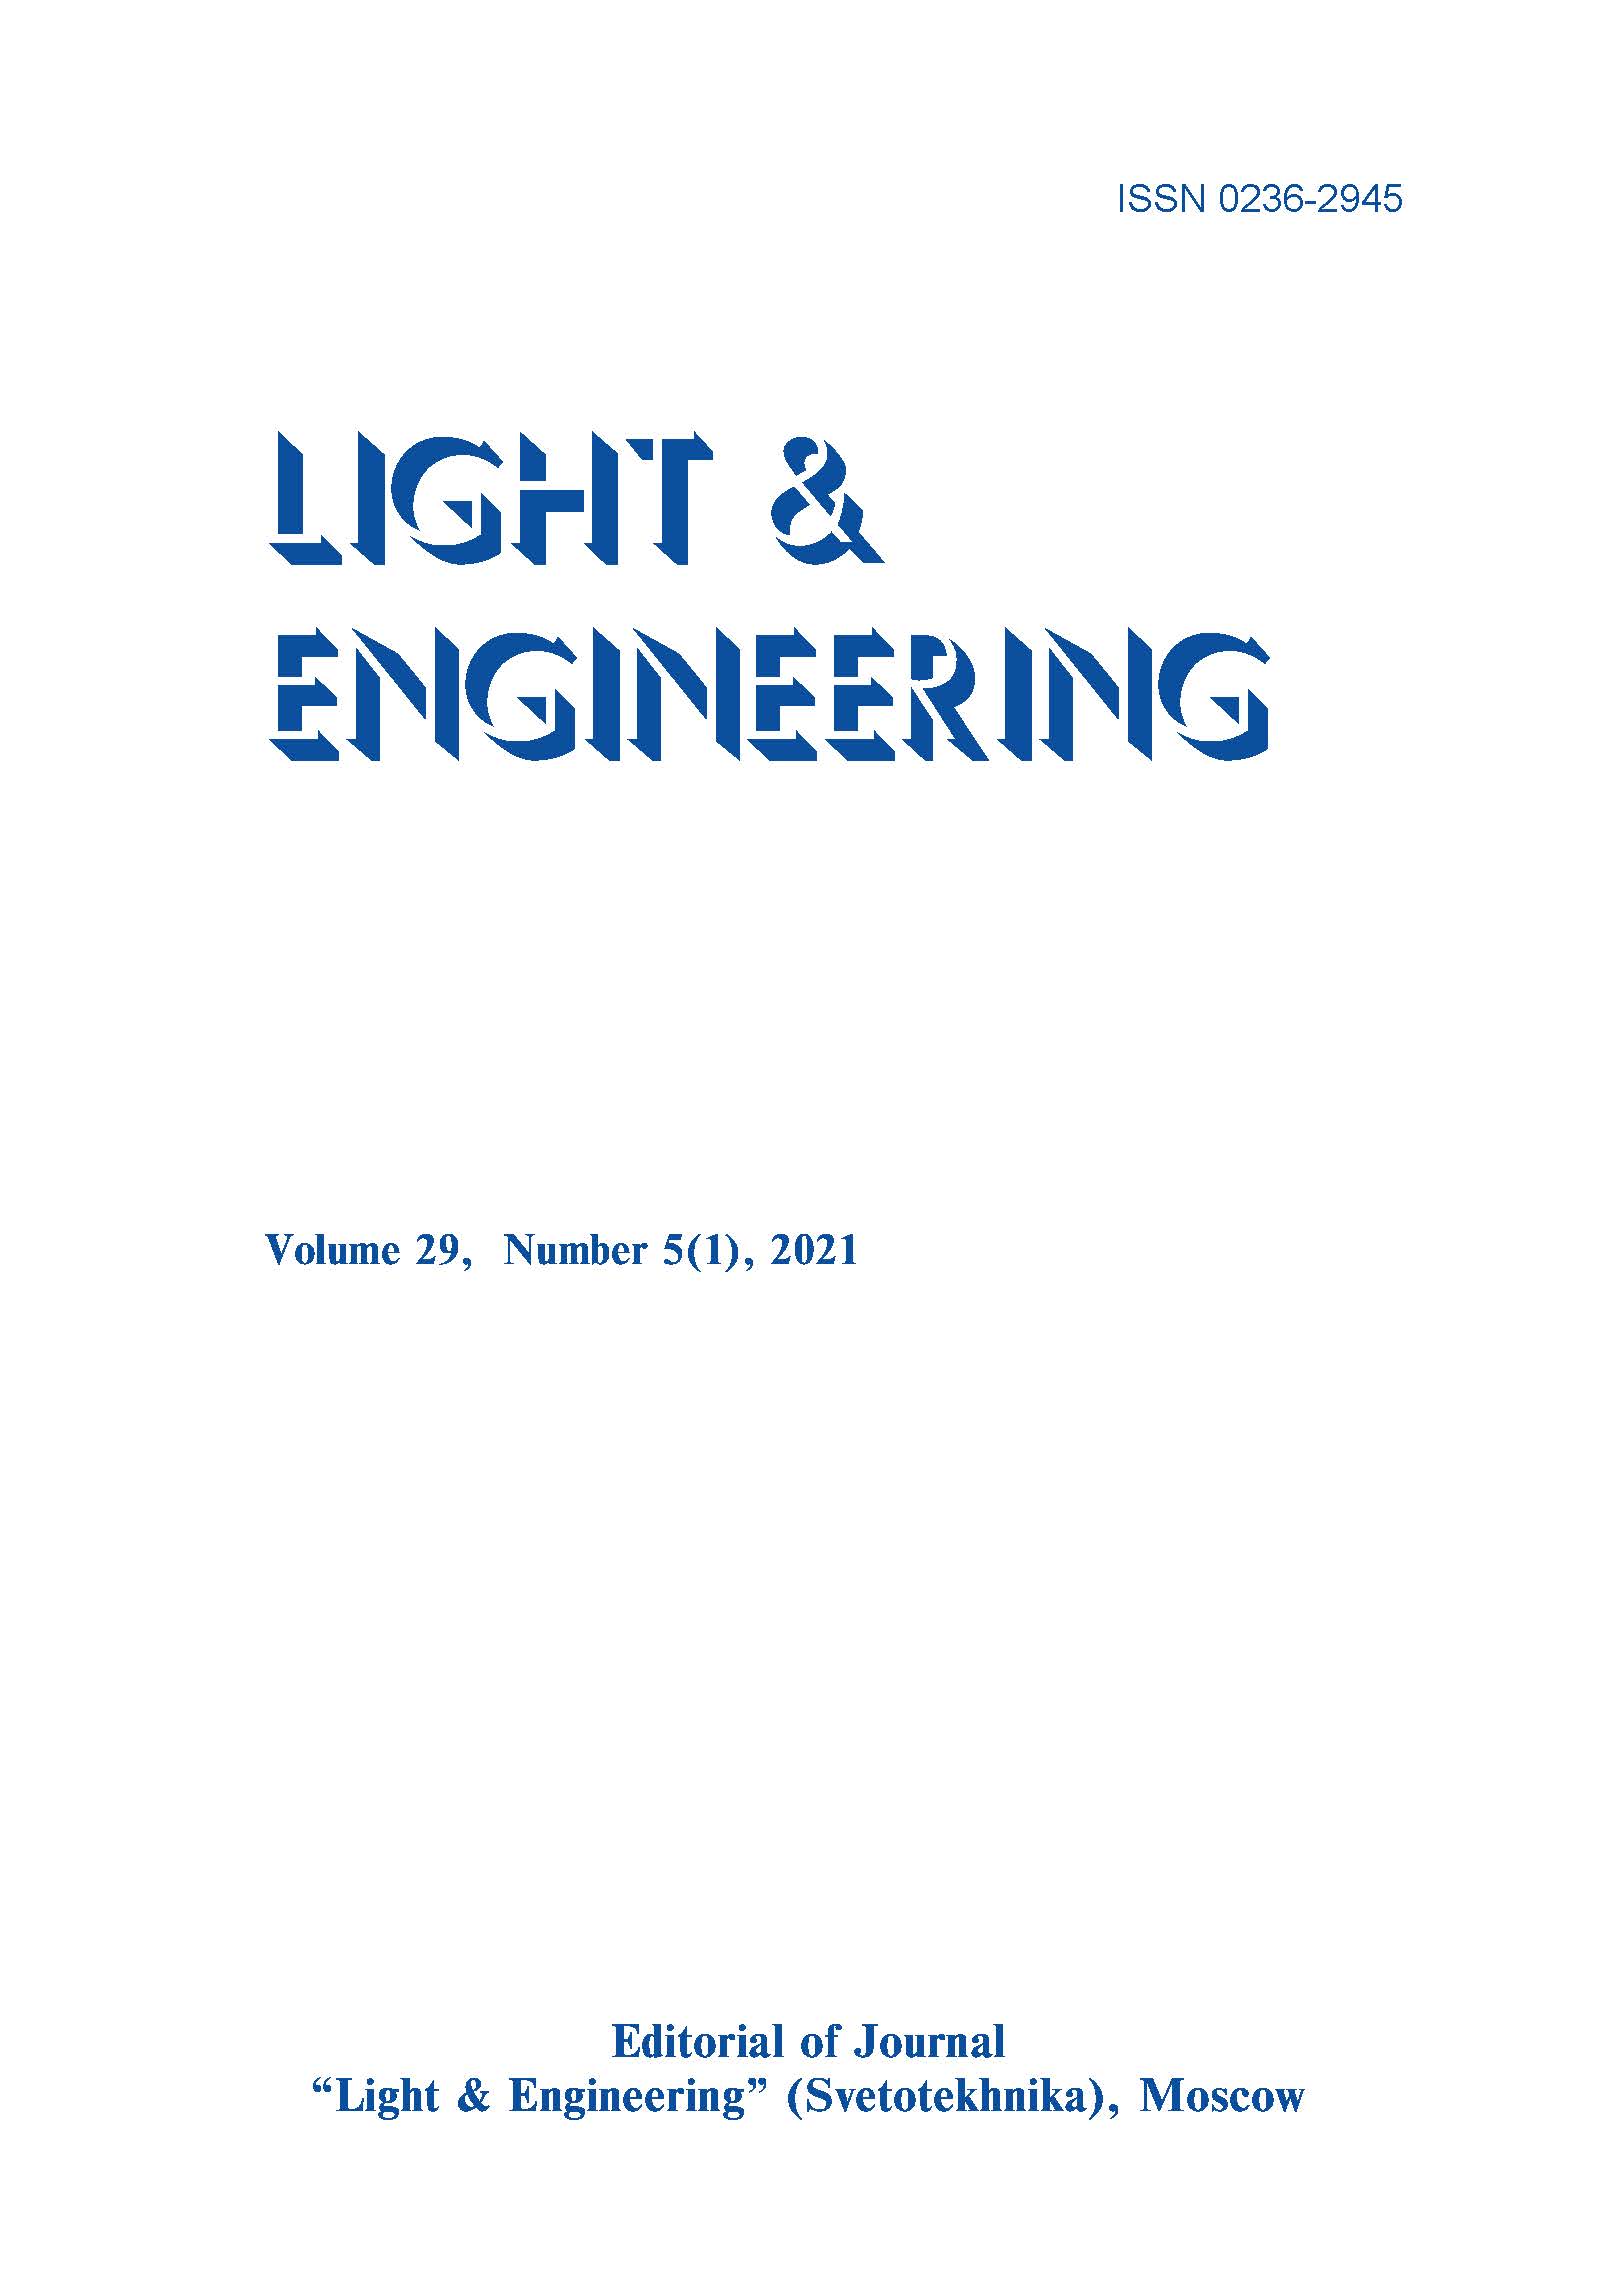 Daylight, Solar Radiation, Architectural Expression, and Energy Efficiency of Buildings L&E, Vol. 29, No. 5 (1), 2021